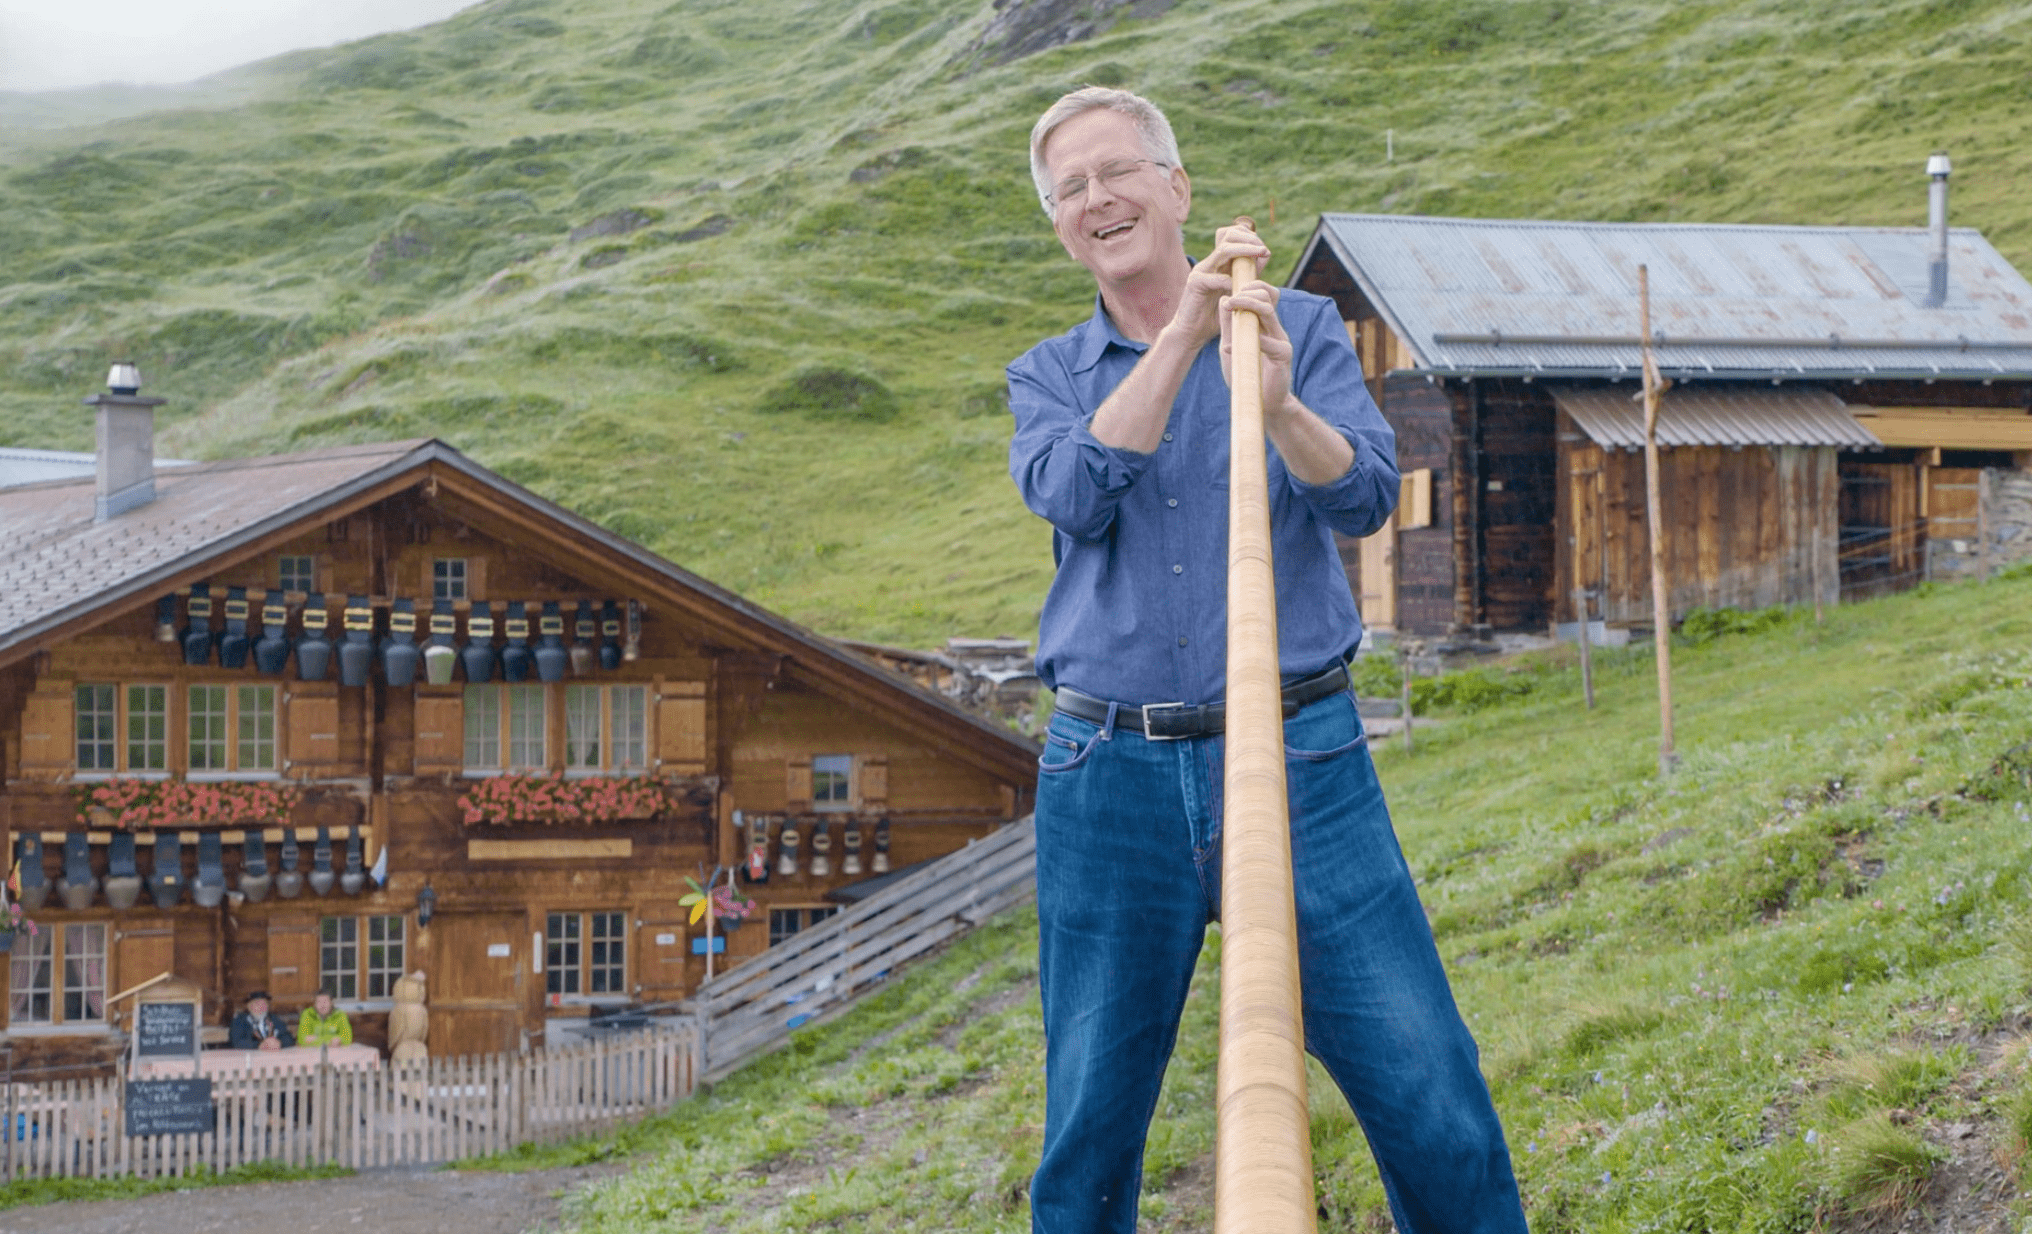 WATCH Rick Steves Best of The Alps